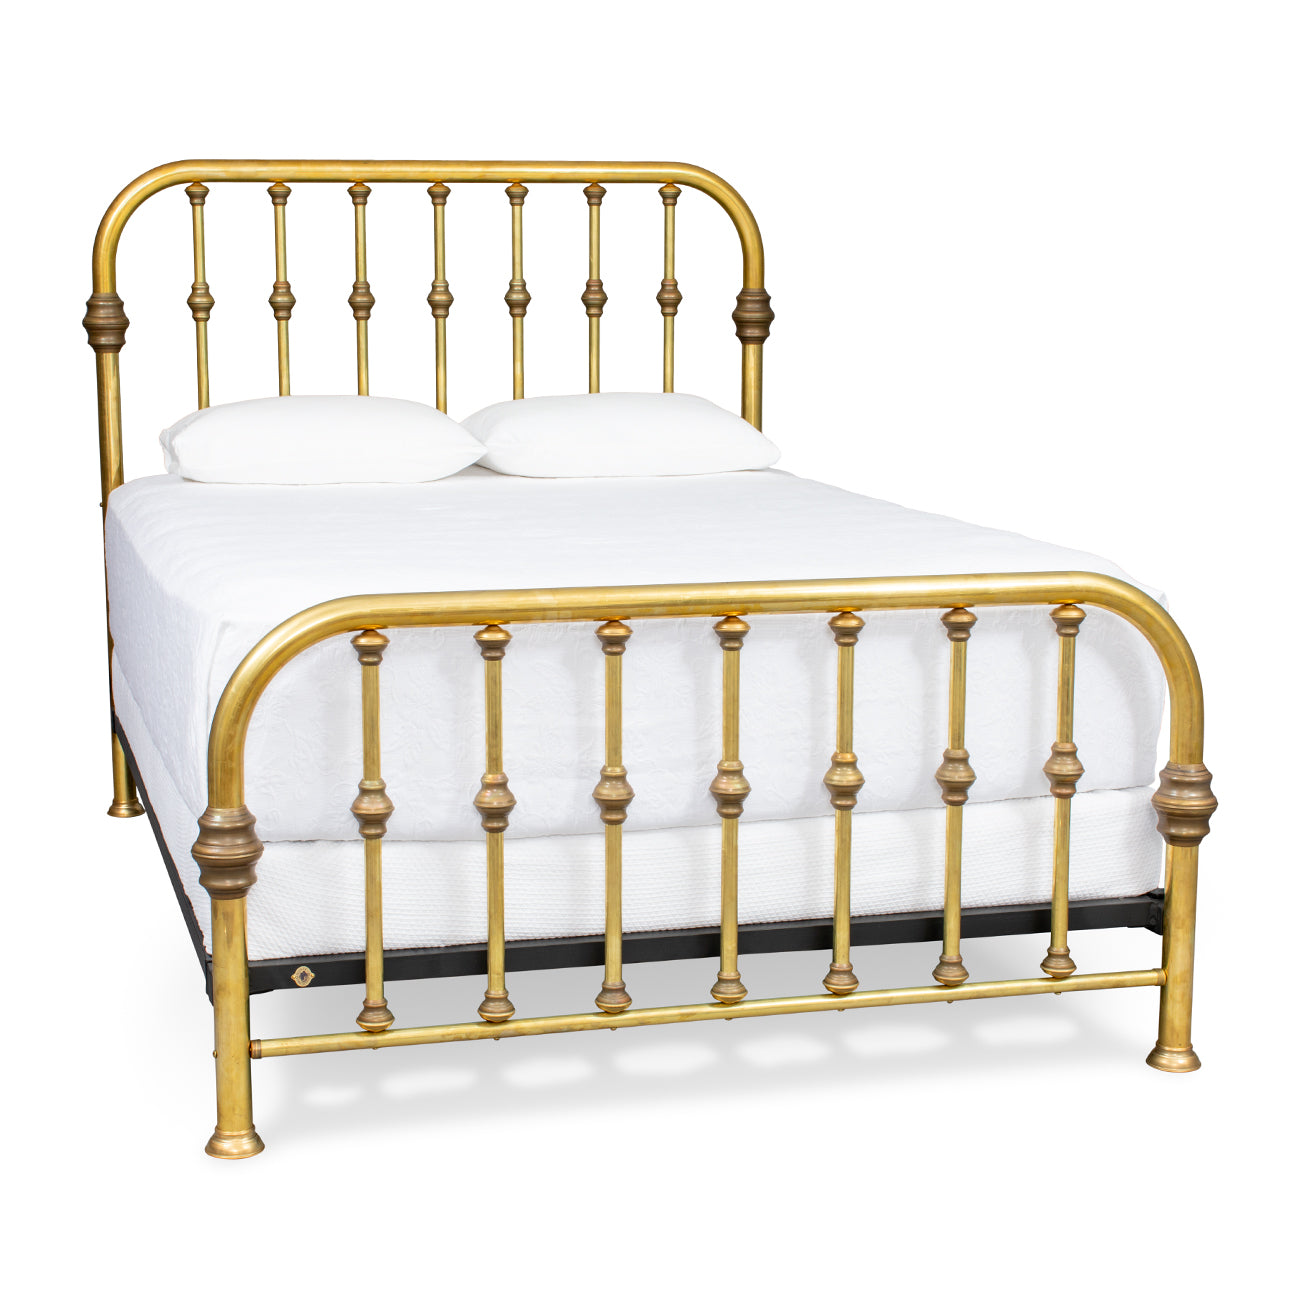 Turn of the Century Bed, Brass Beds of Virginia